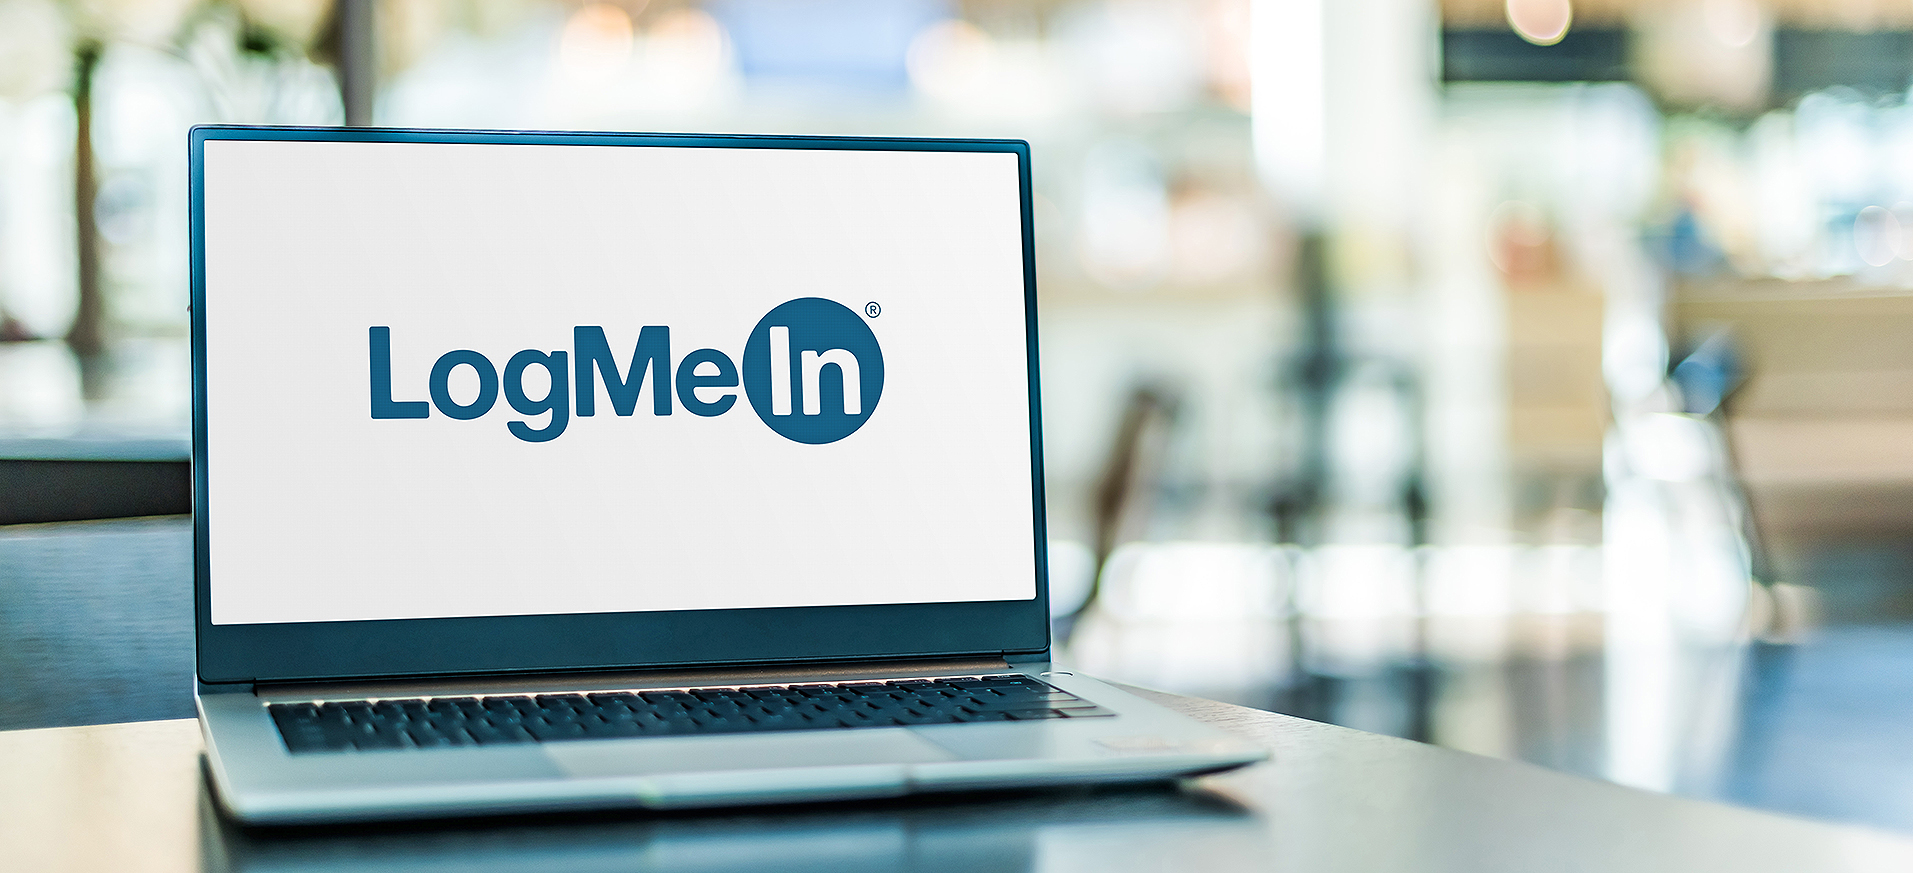 LogMeIn to set up LastPass as Stand Alone Company